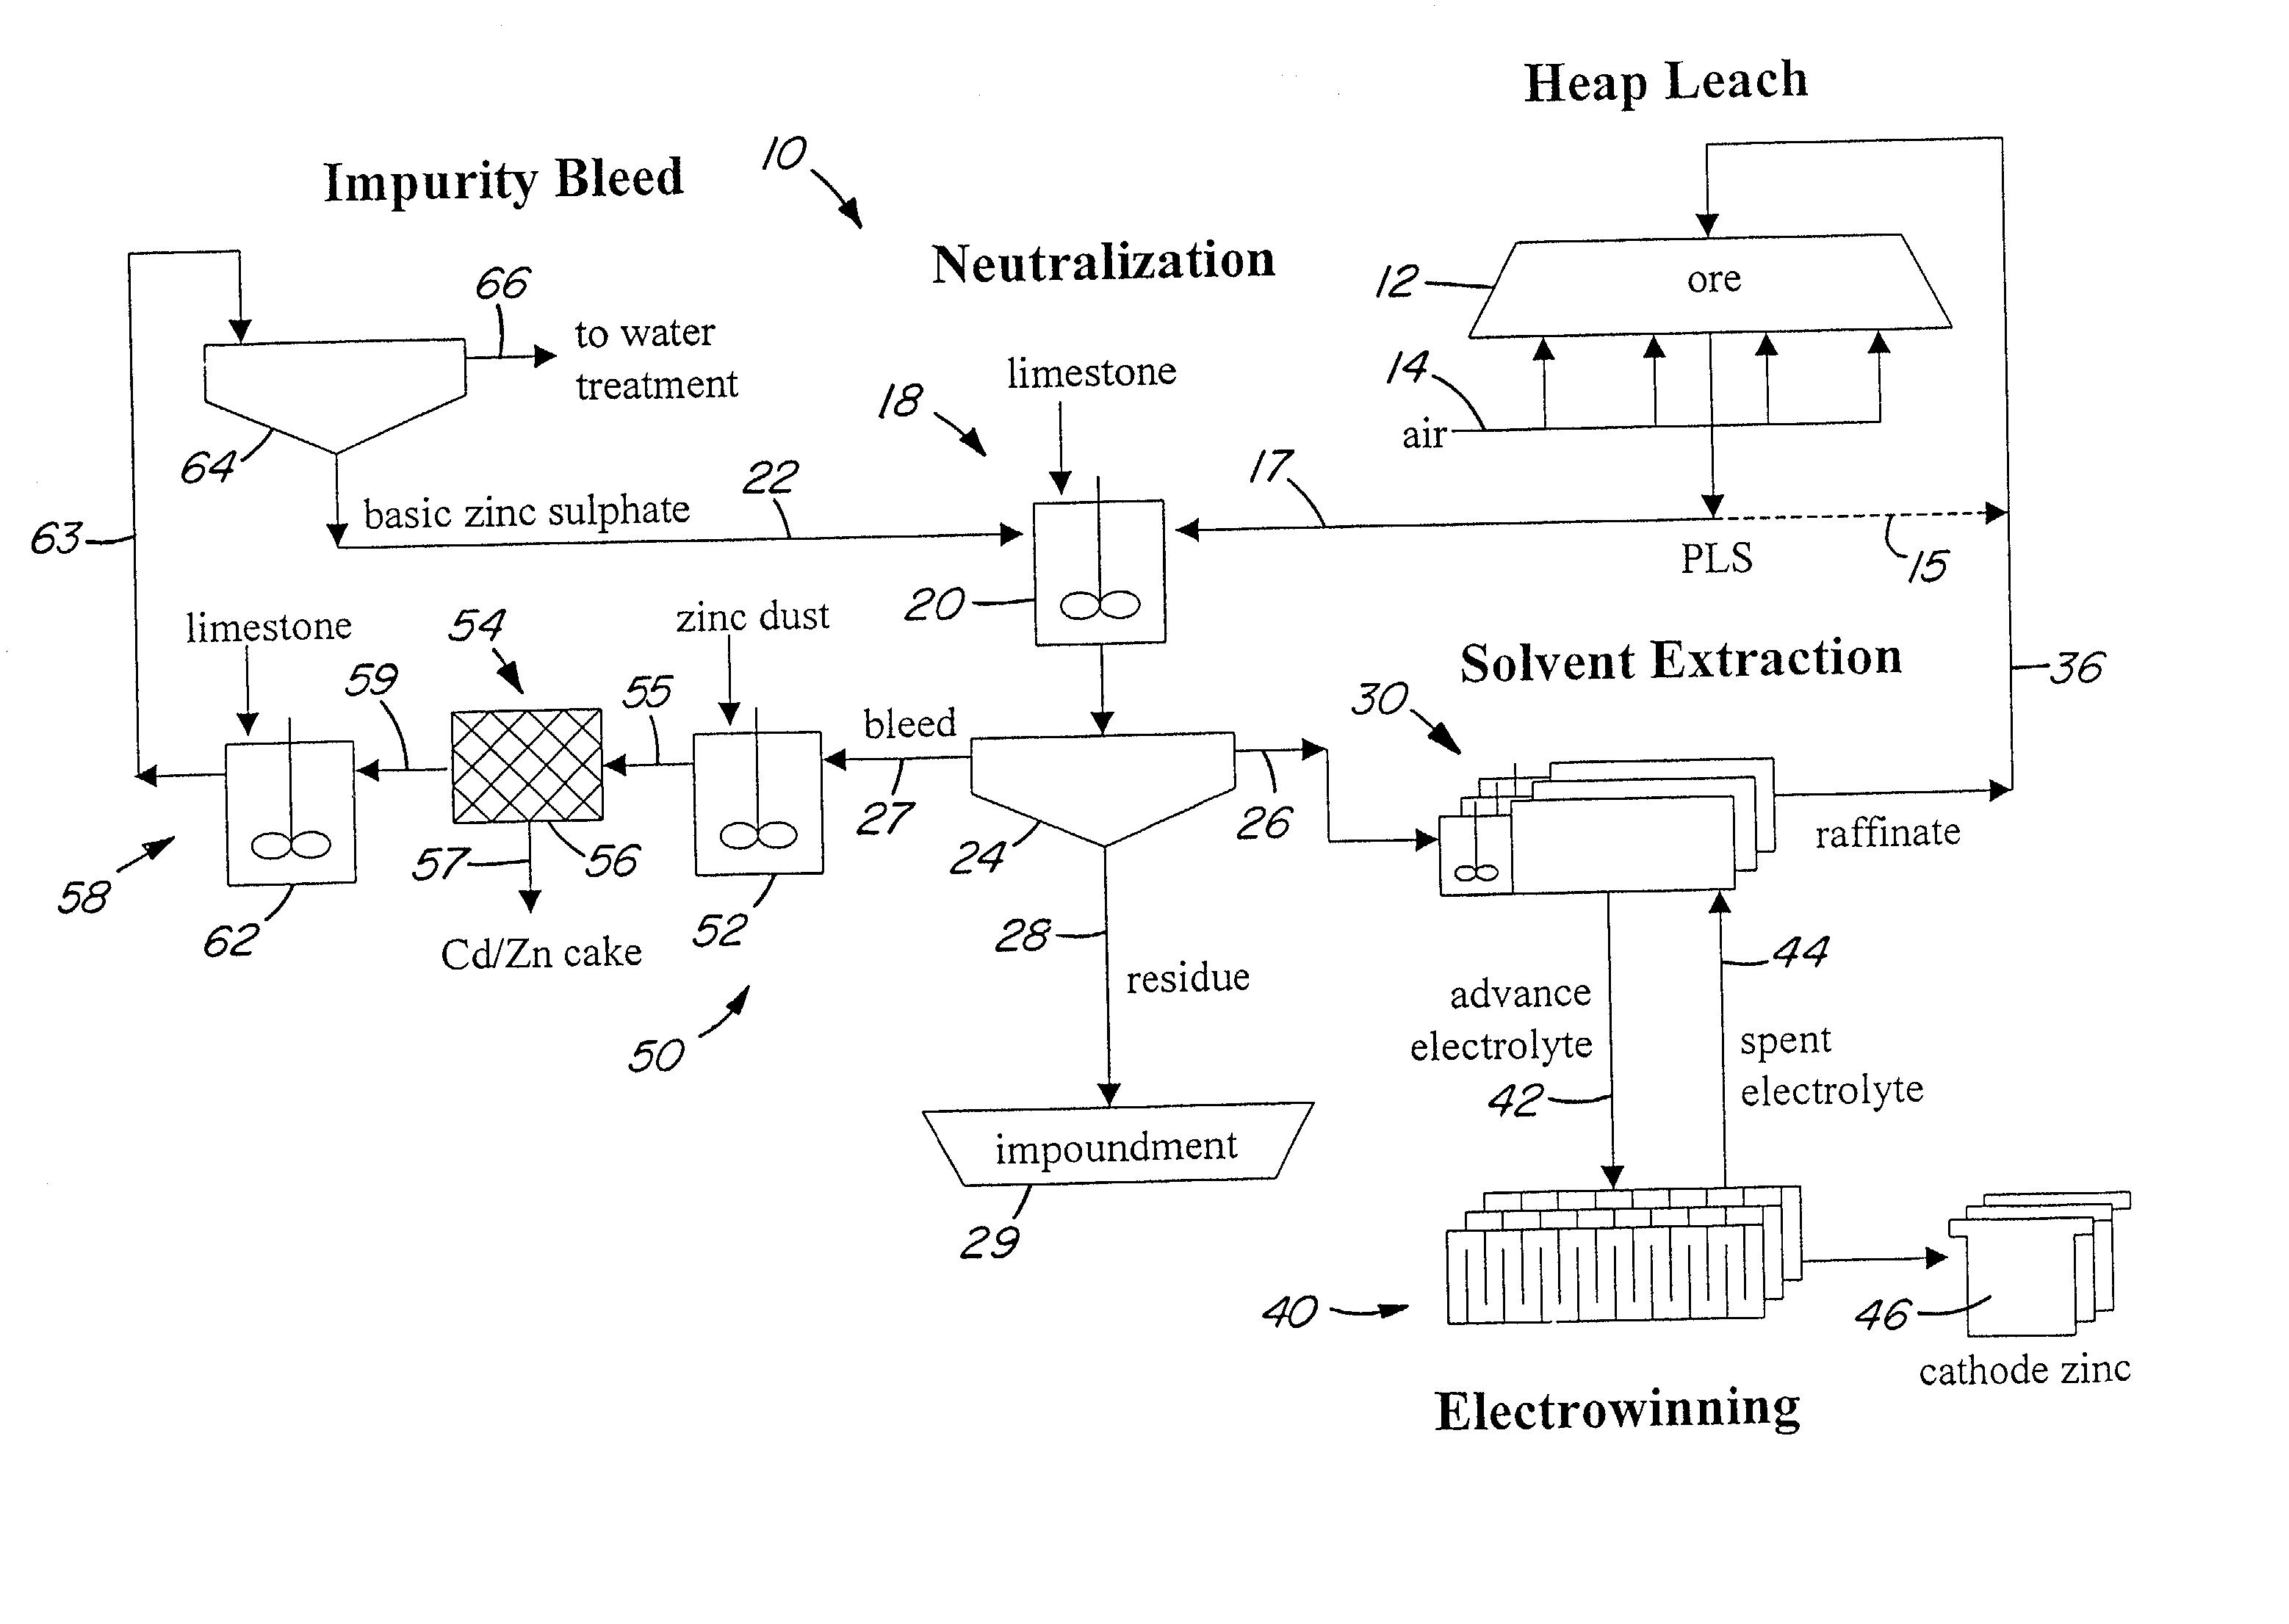 Heap bioleaching process for the extraction of zinc